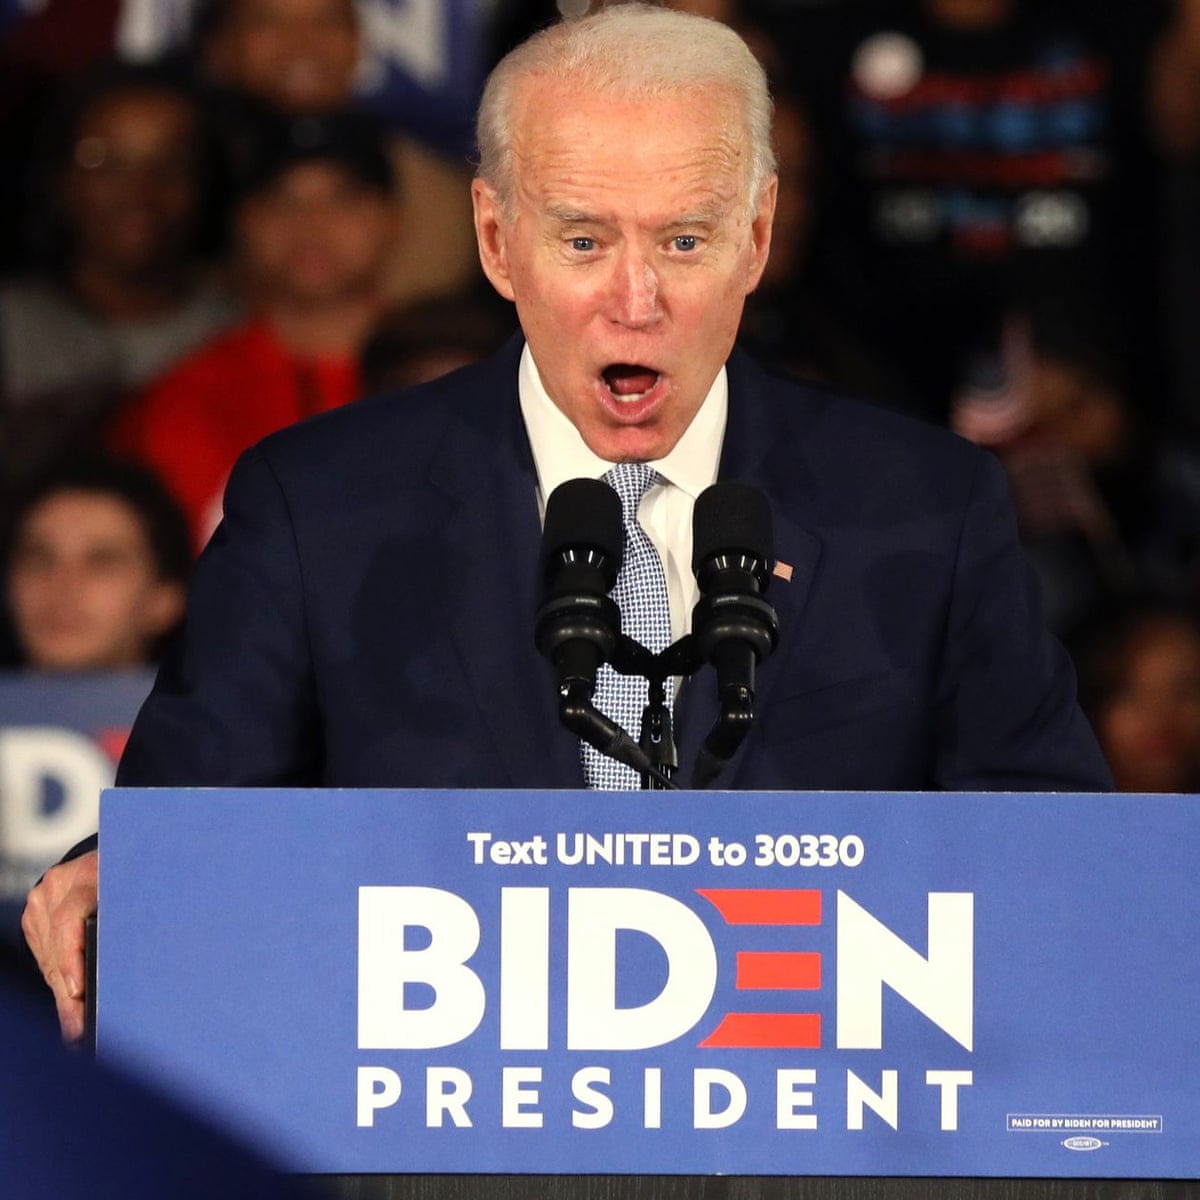 Super Biden sets up showdown with South Carolina win | US elections 2020 | The Guardian